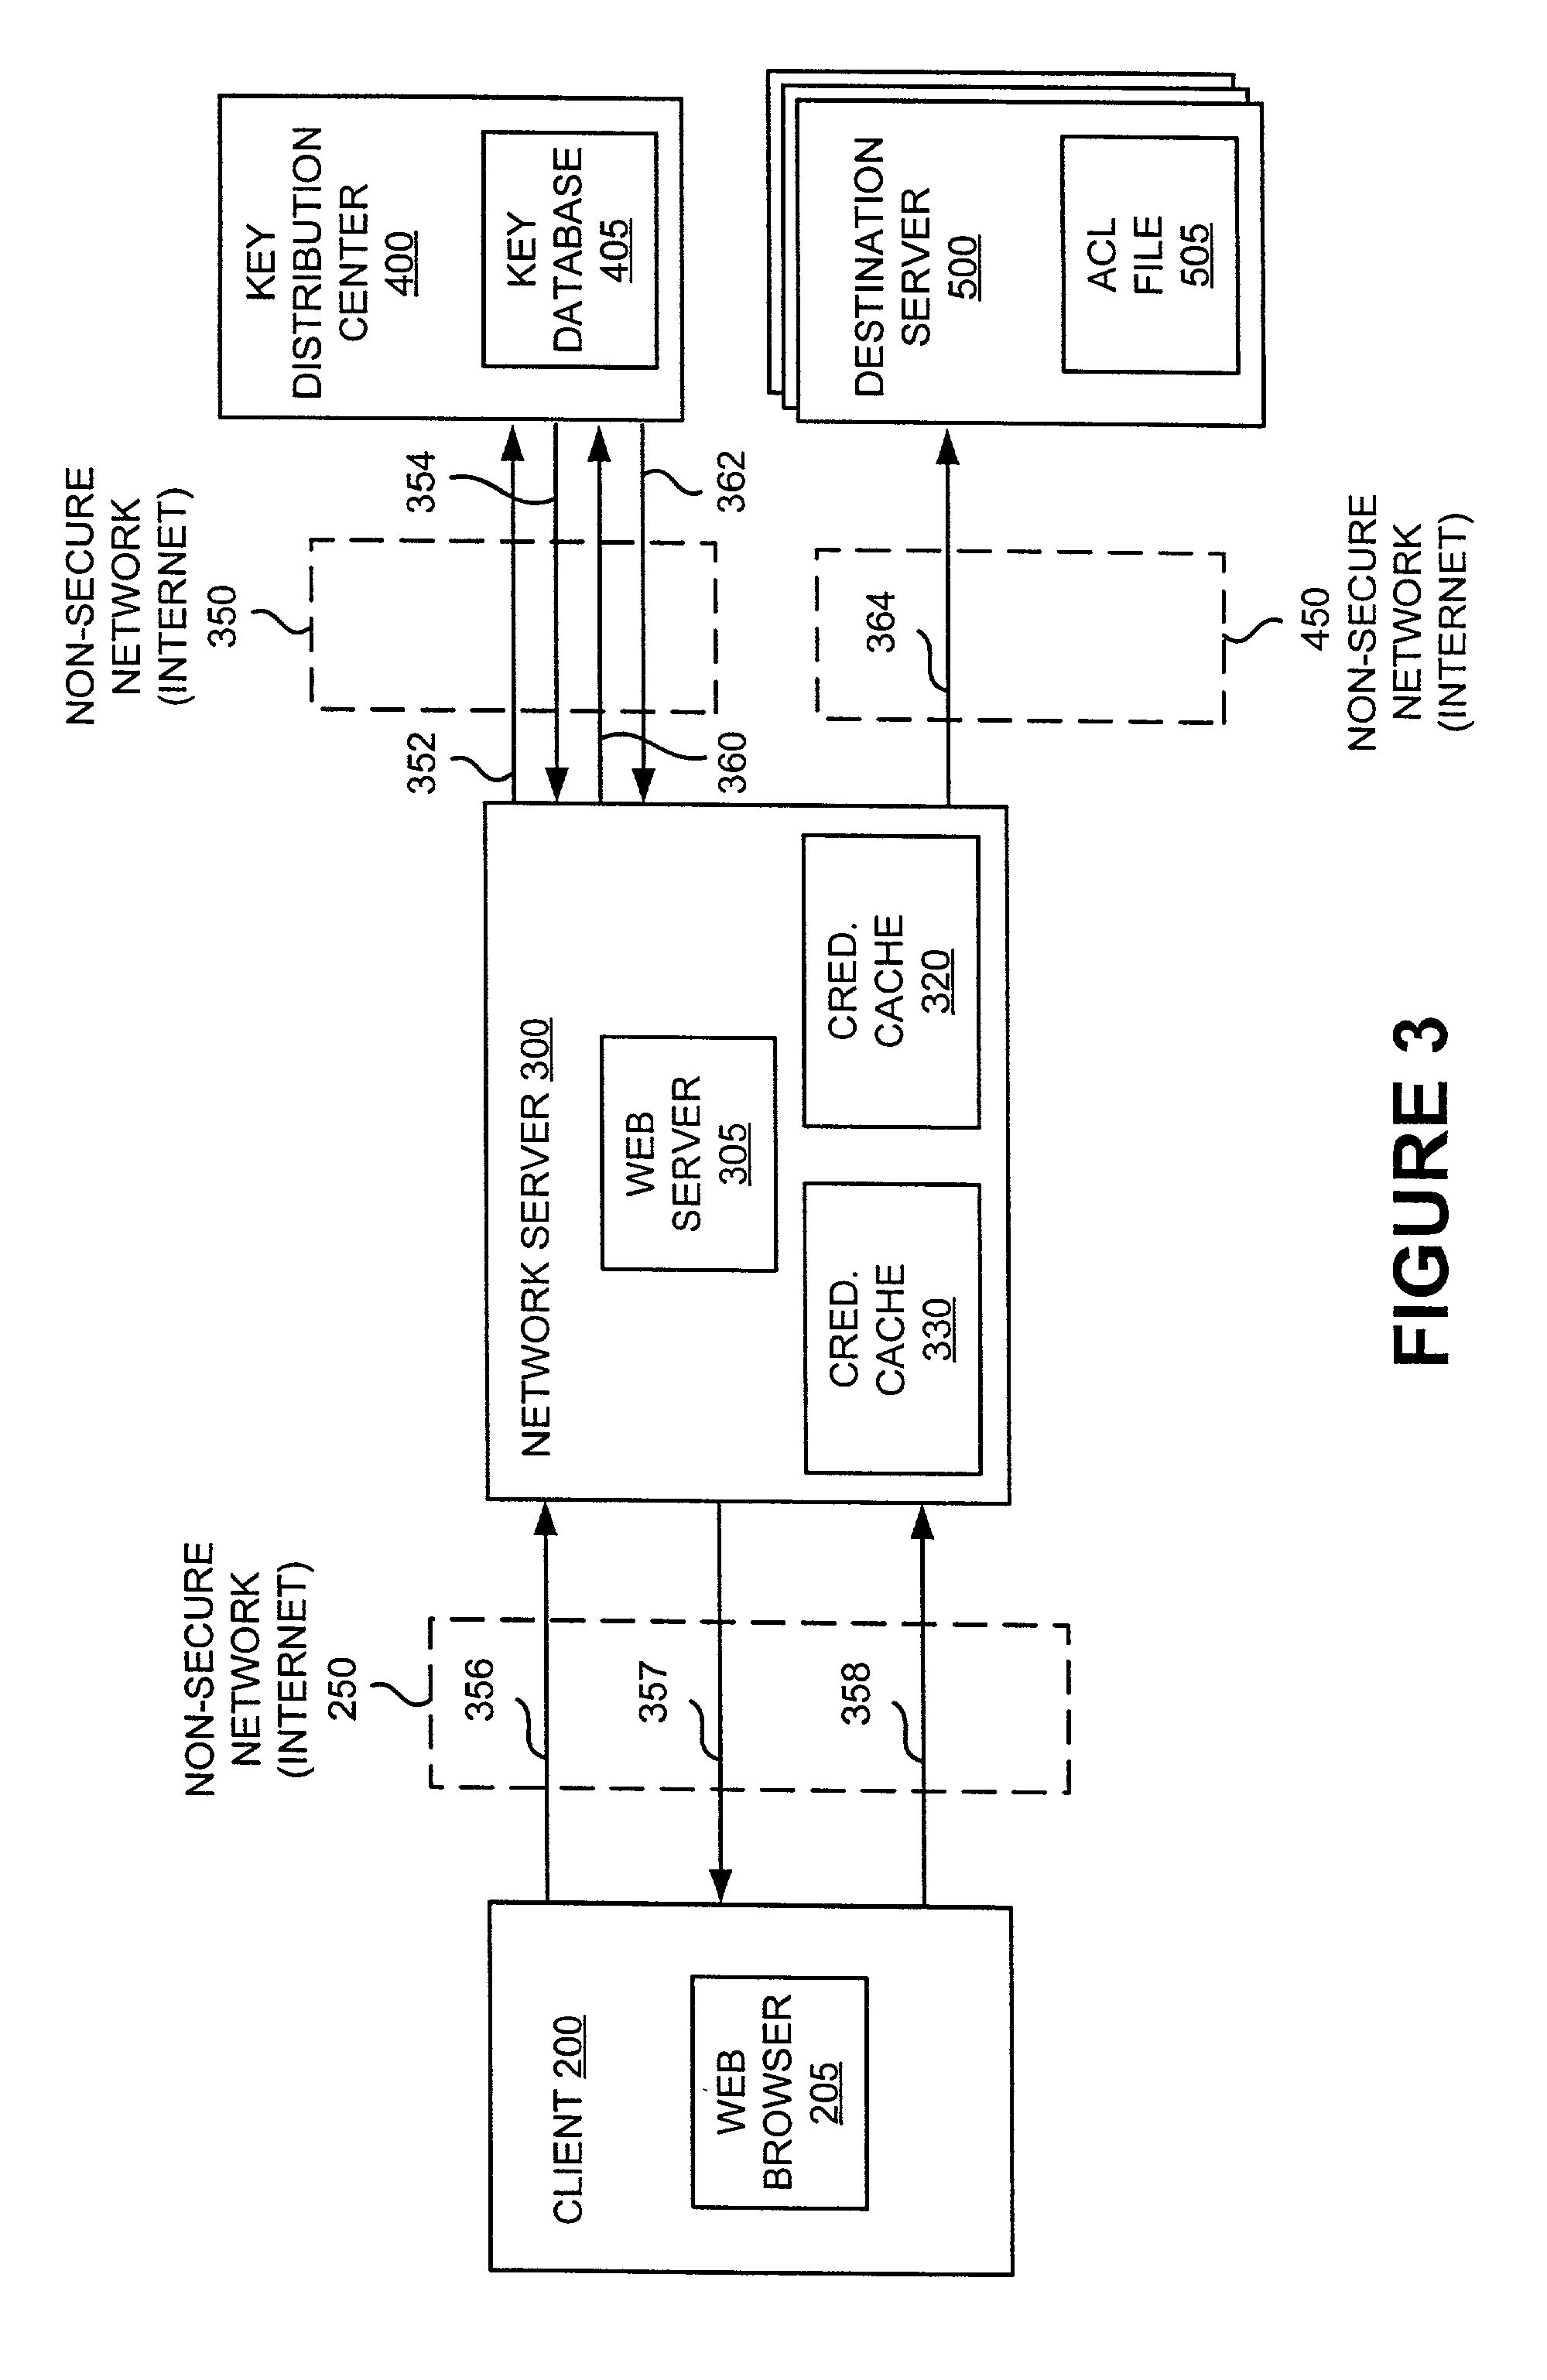 Platform-neutral system and method for providing secure remote operations over an insecure computer network